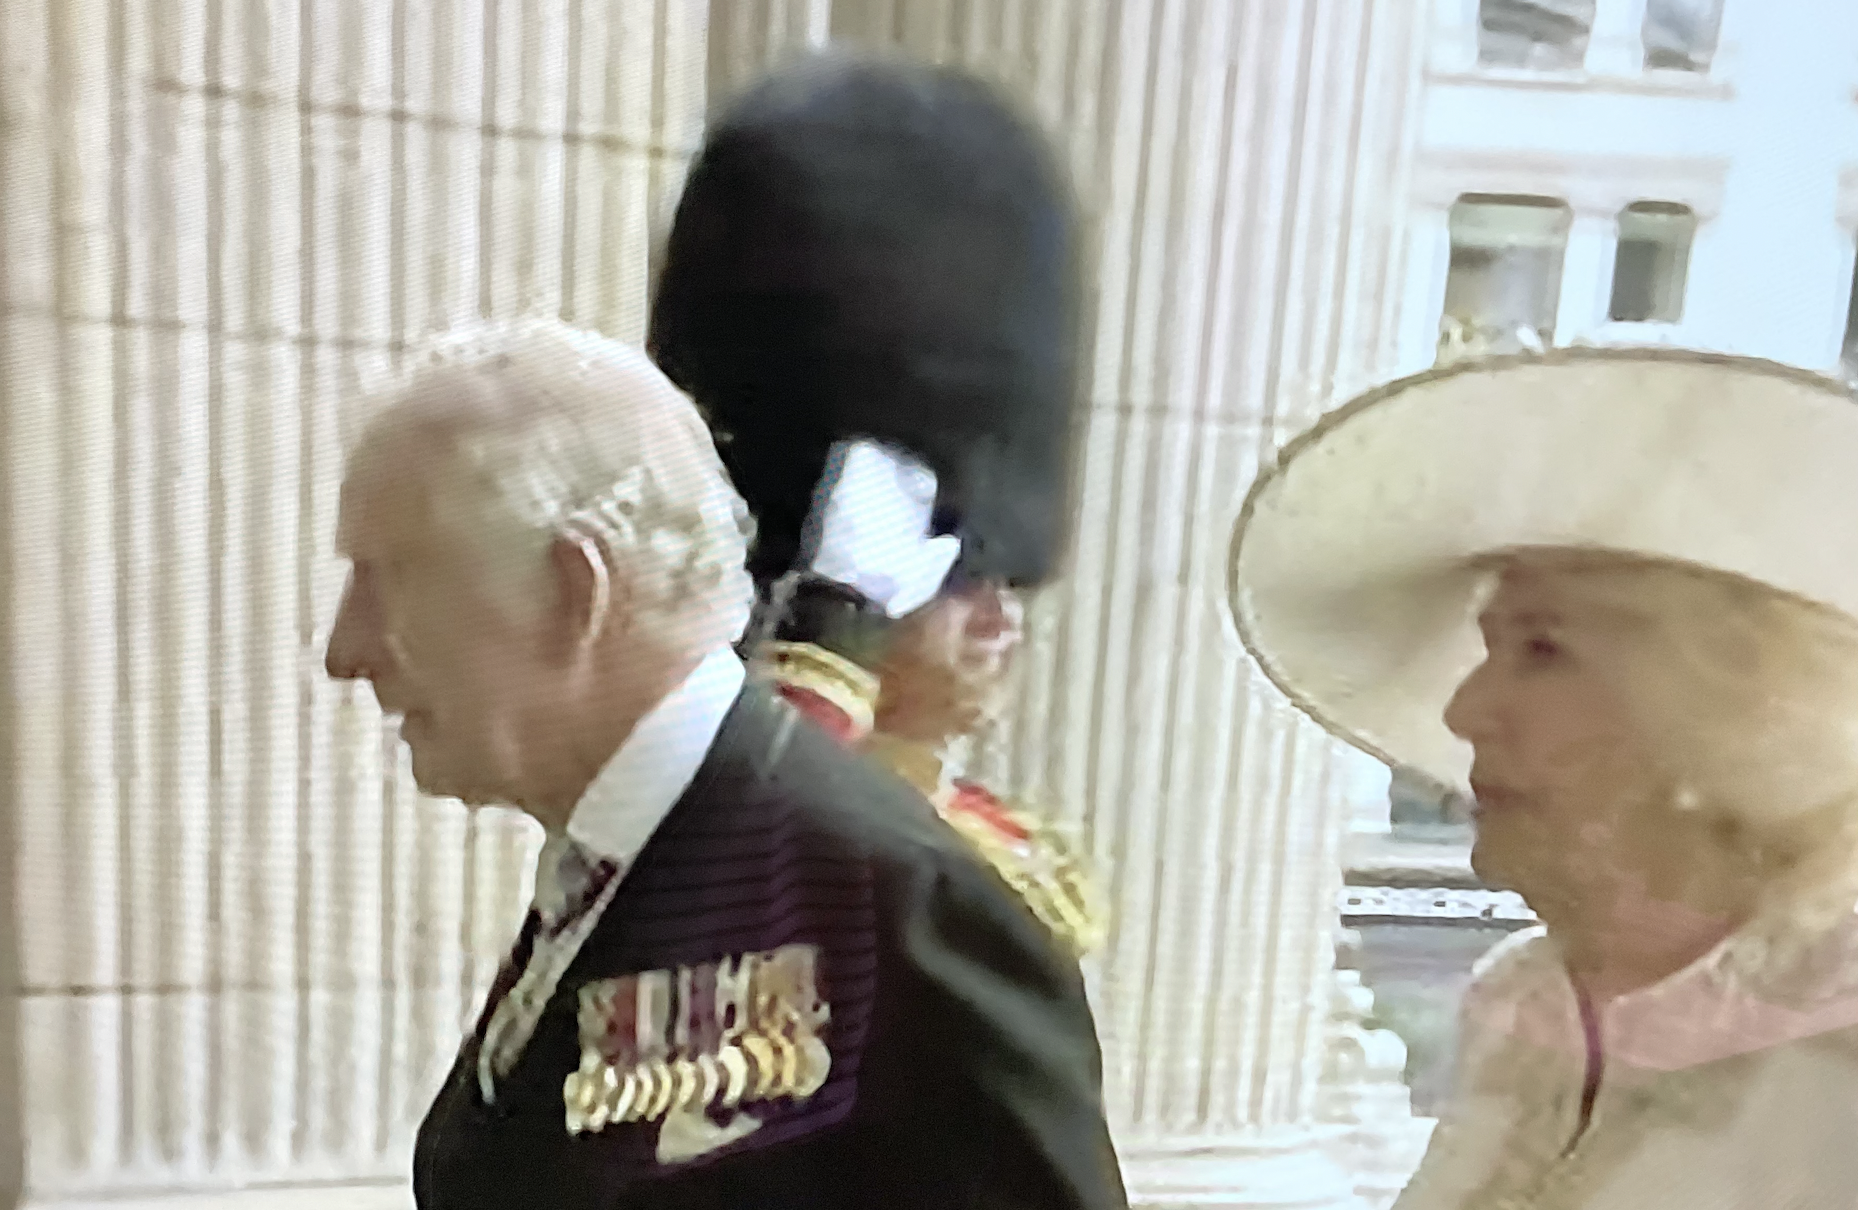 Prince Charles and Camilla at the St Paul's Cahtedral for the Thanksgiving Service.